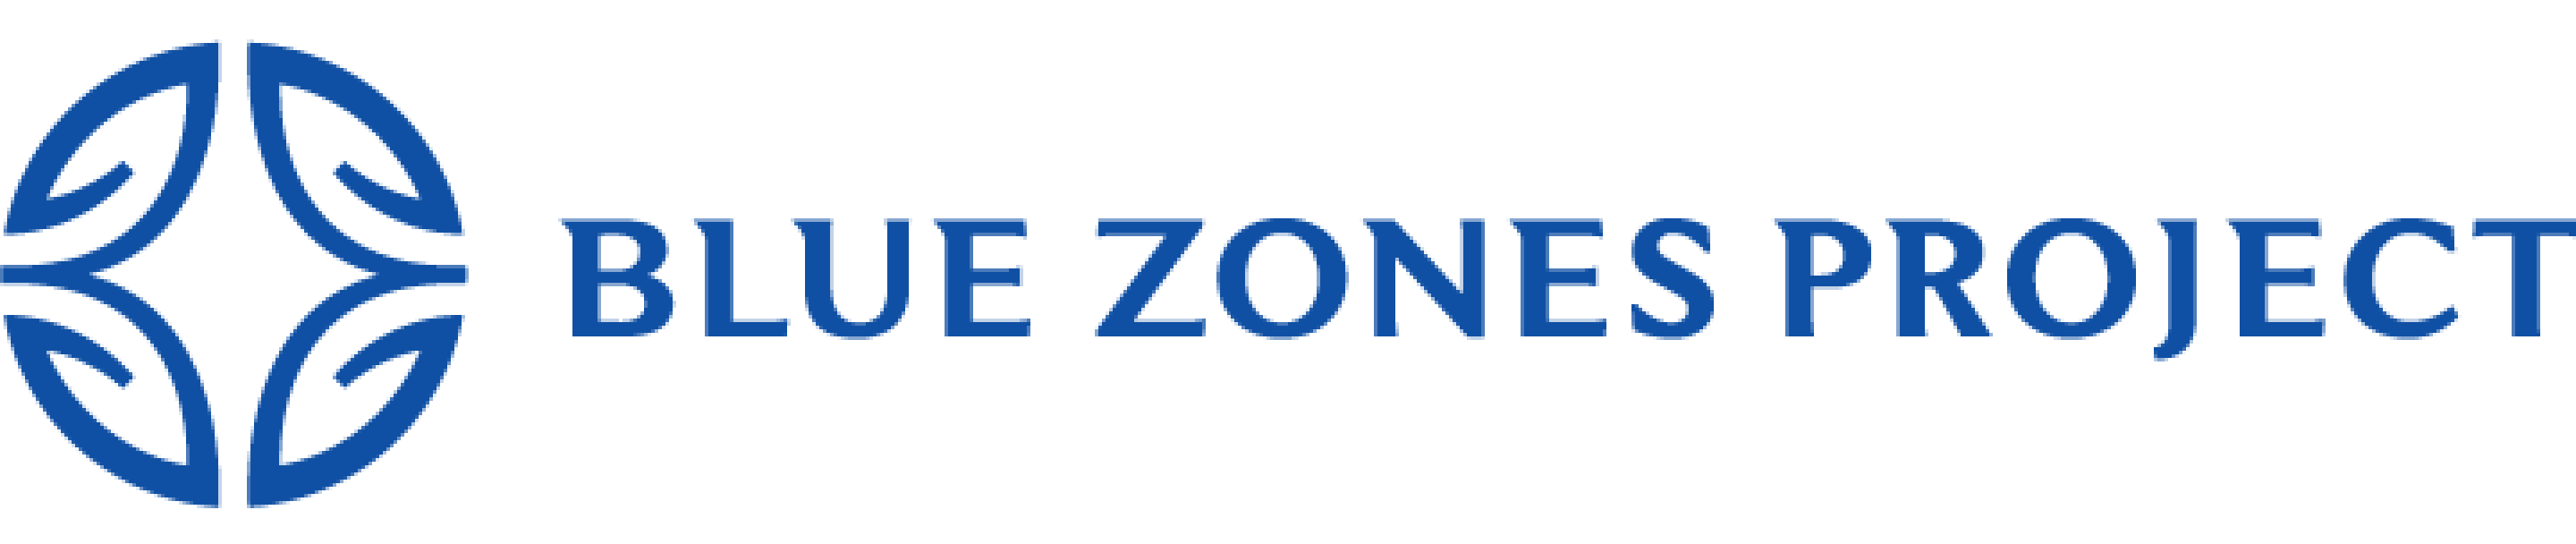 Blue Zones Project